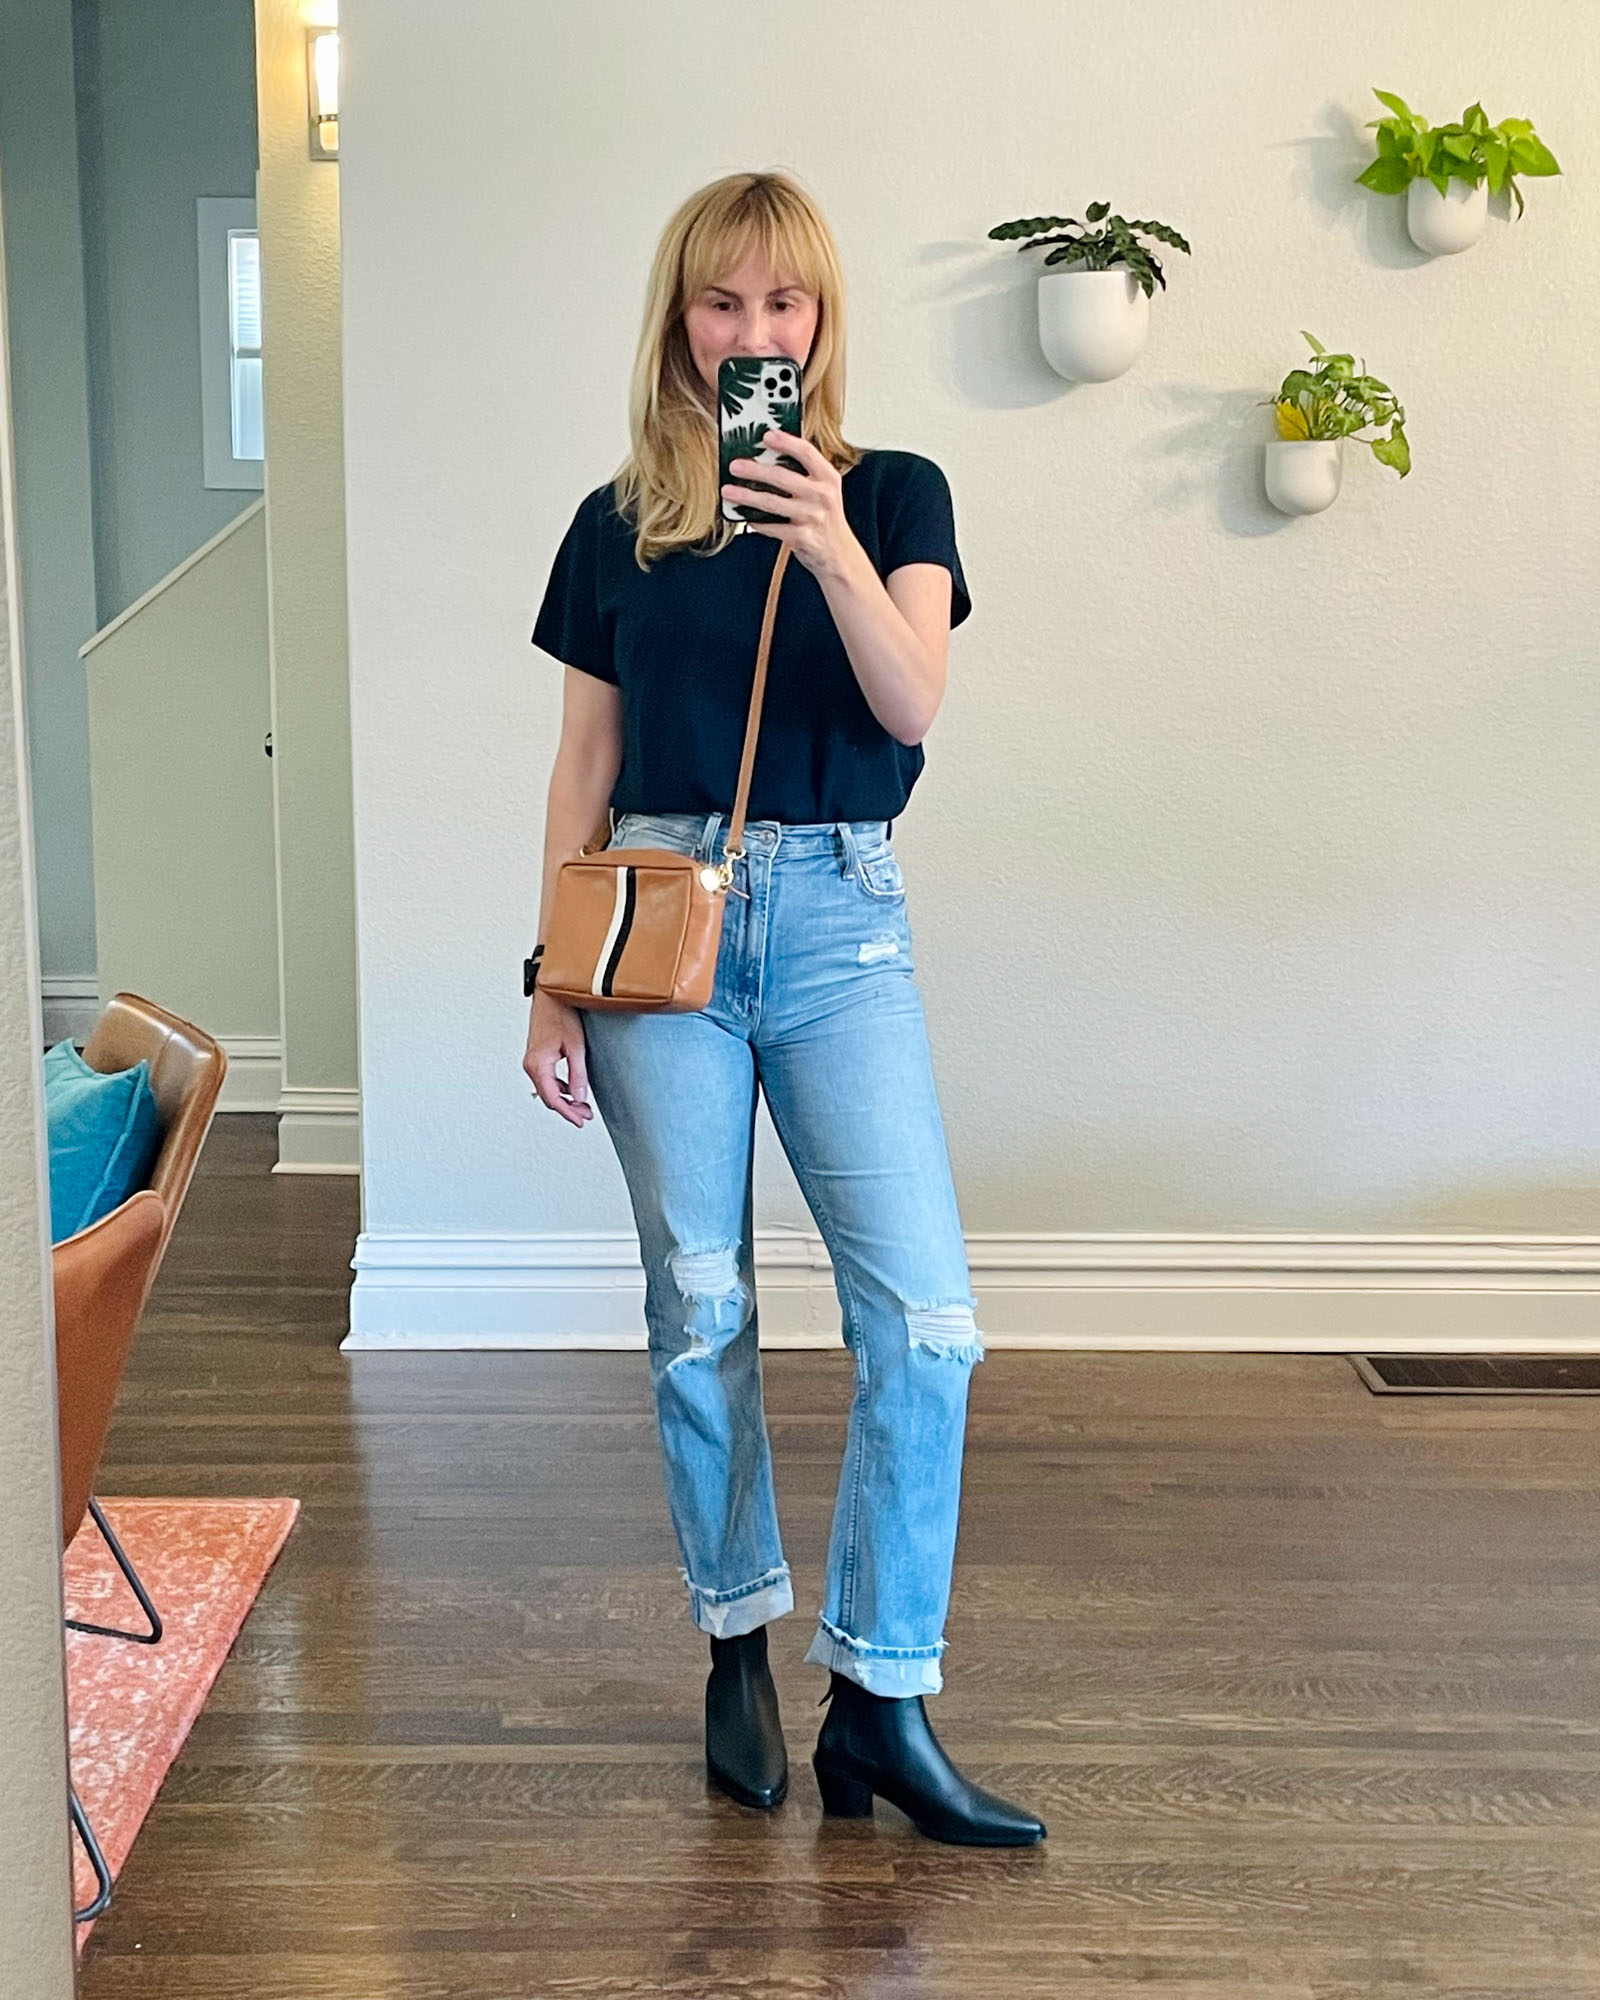 Wearing the Black Frame Booties from the Nordstrom Sale with the Mother Ryder Skimp jeans.